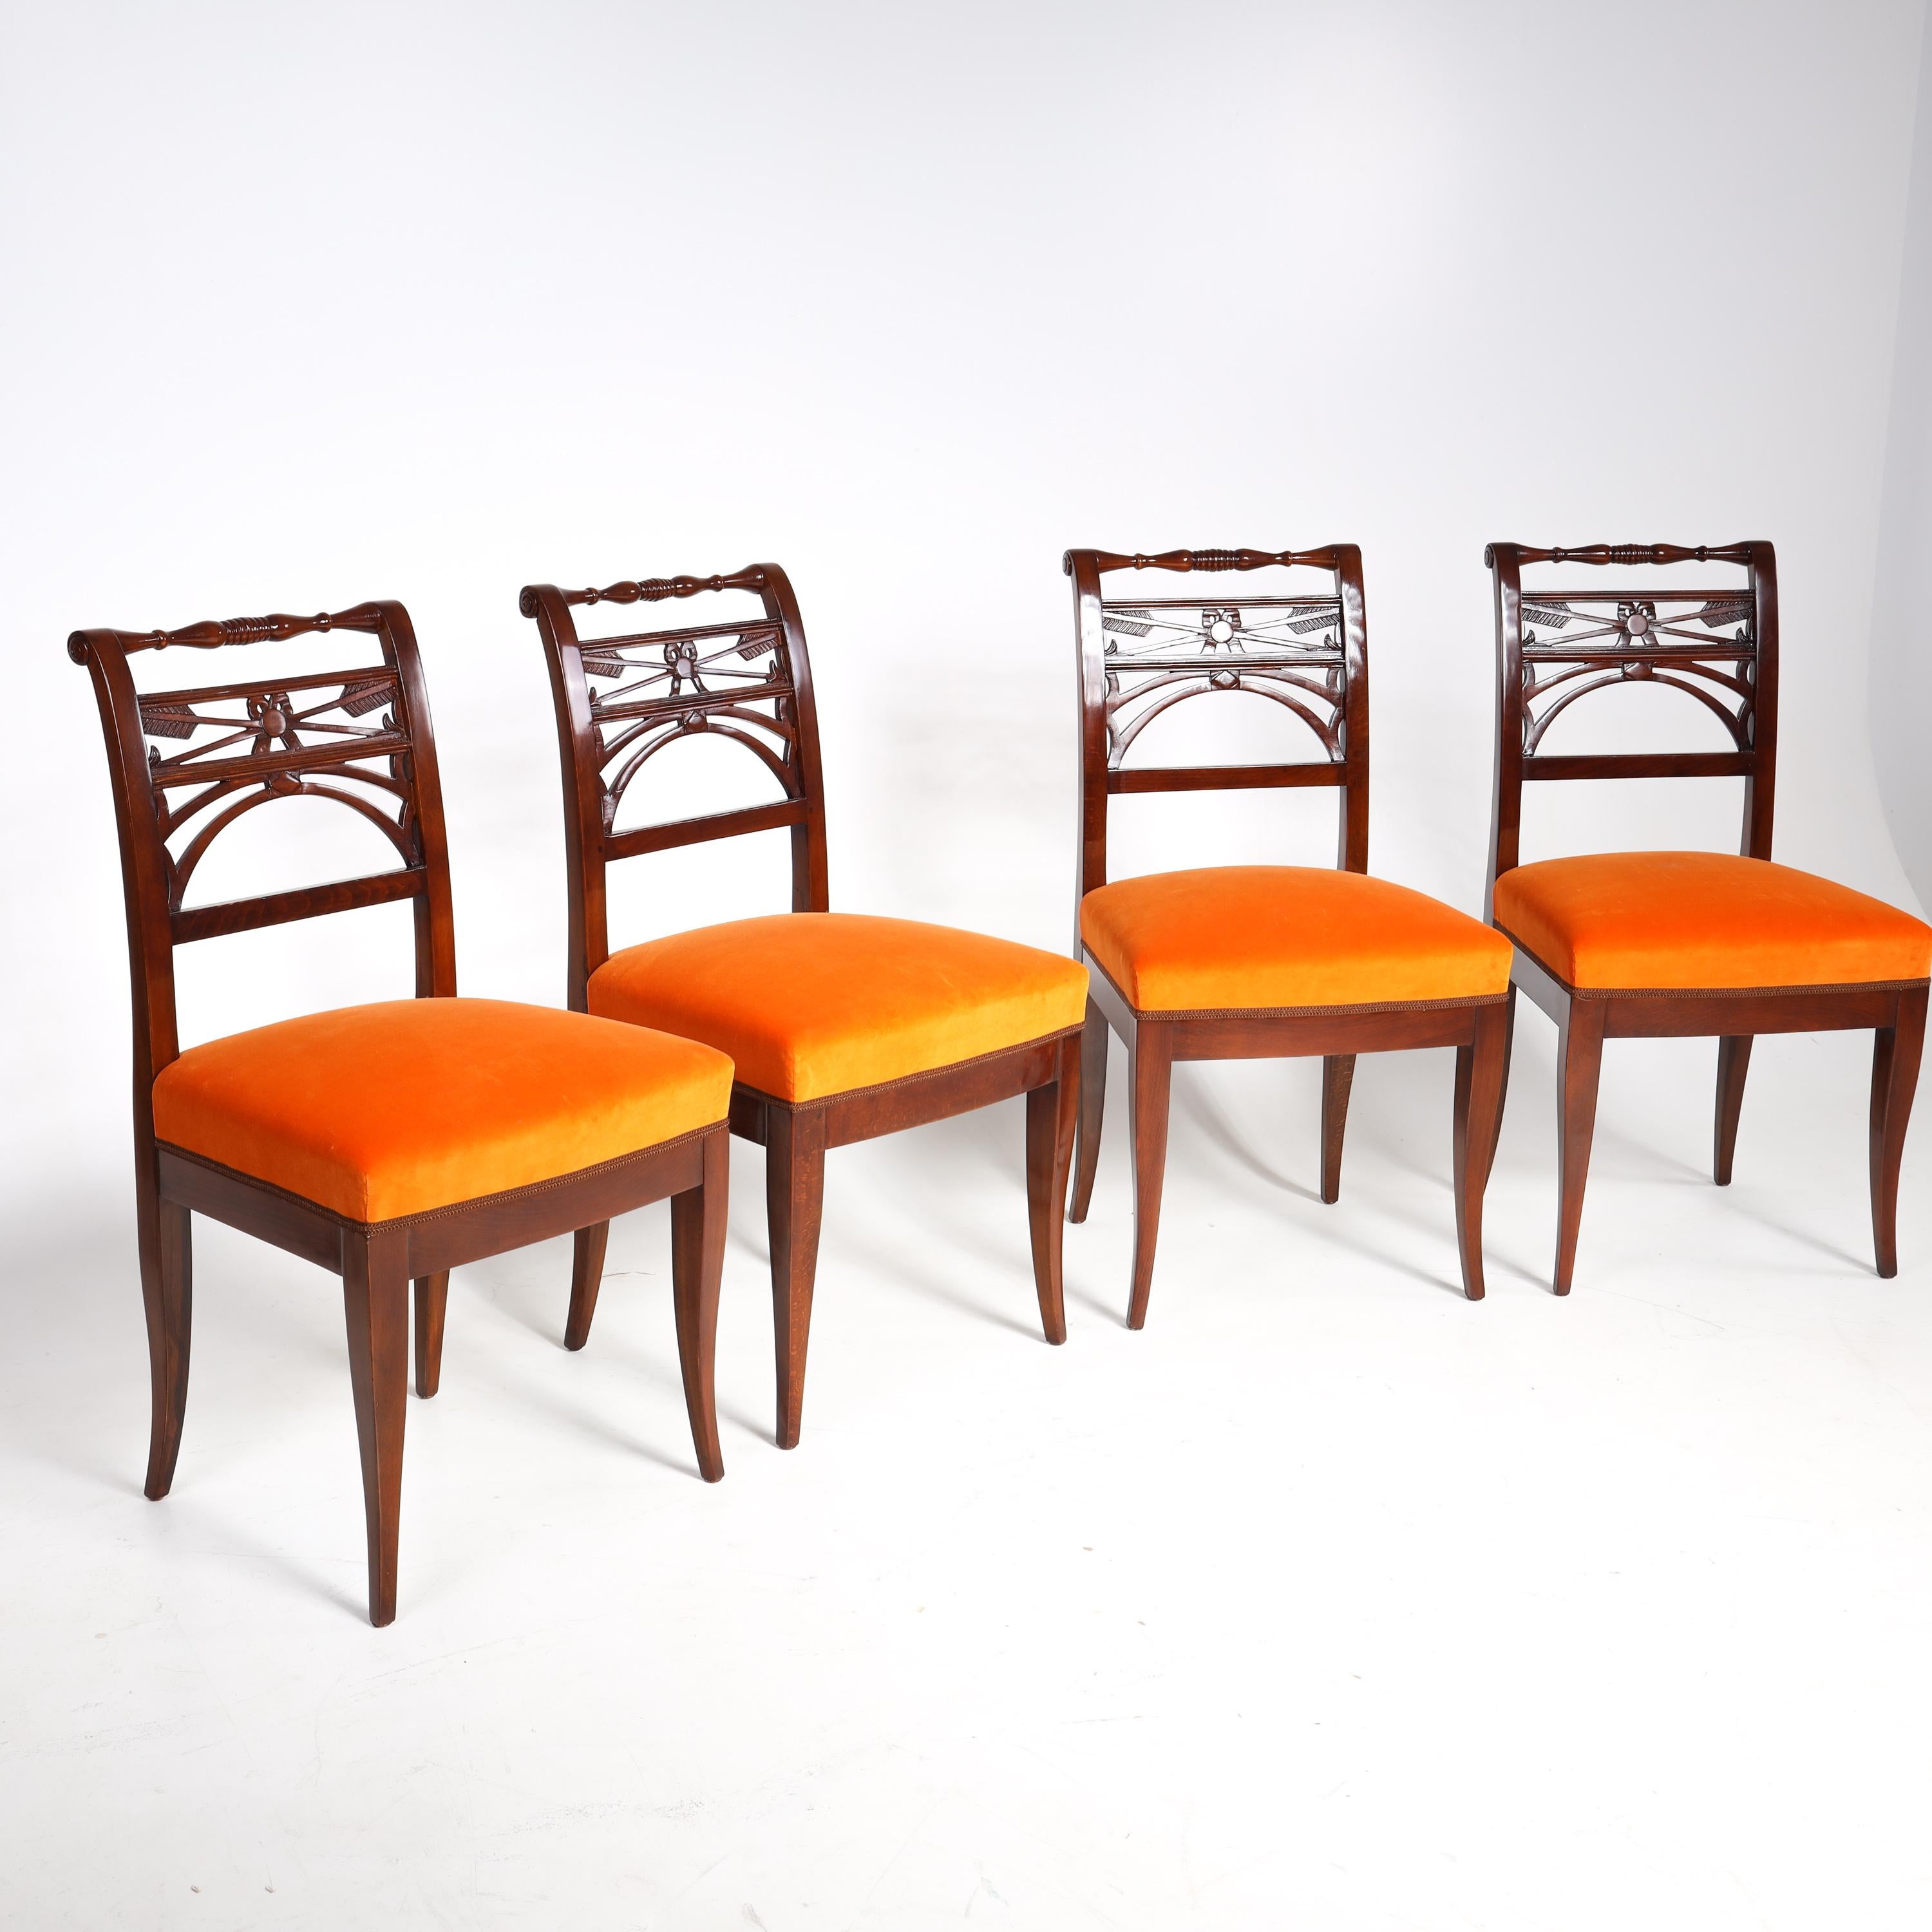 European Neoclassical Chairs, Early 19th Century